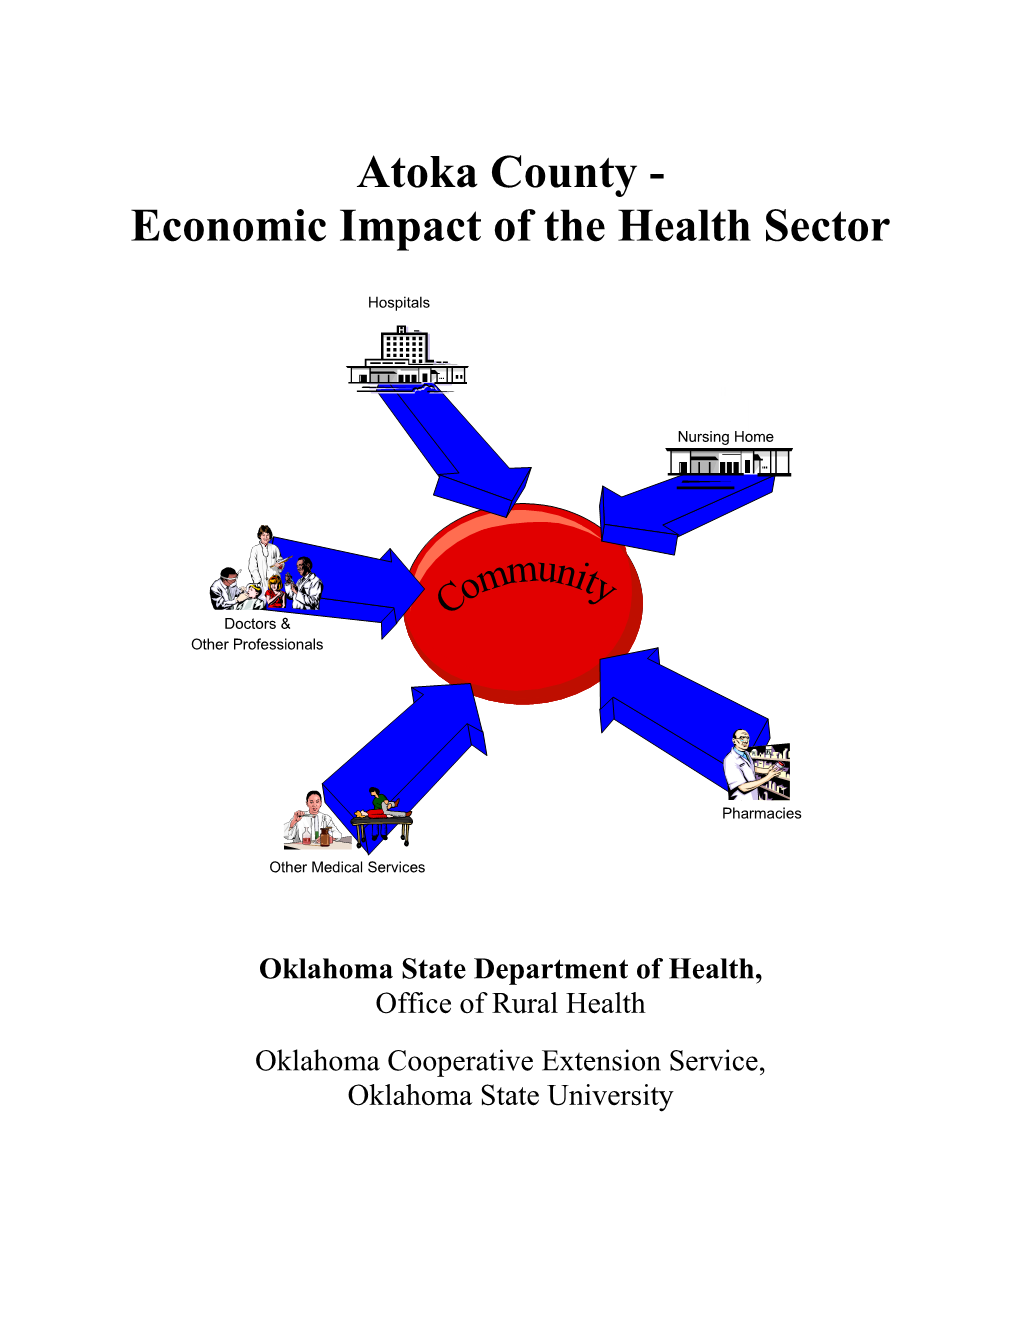 Economic Impact of the Health Sector